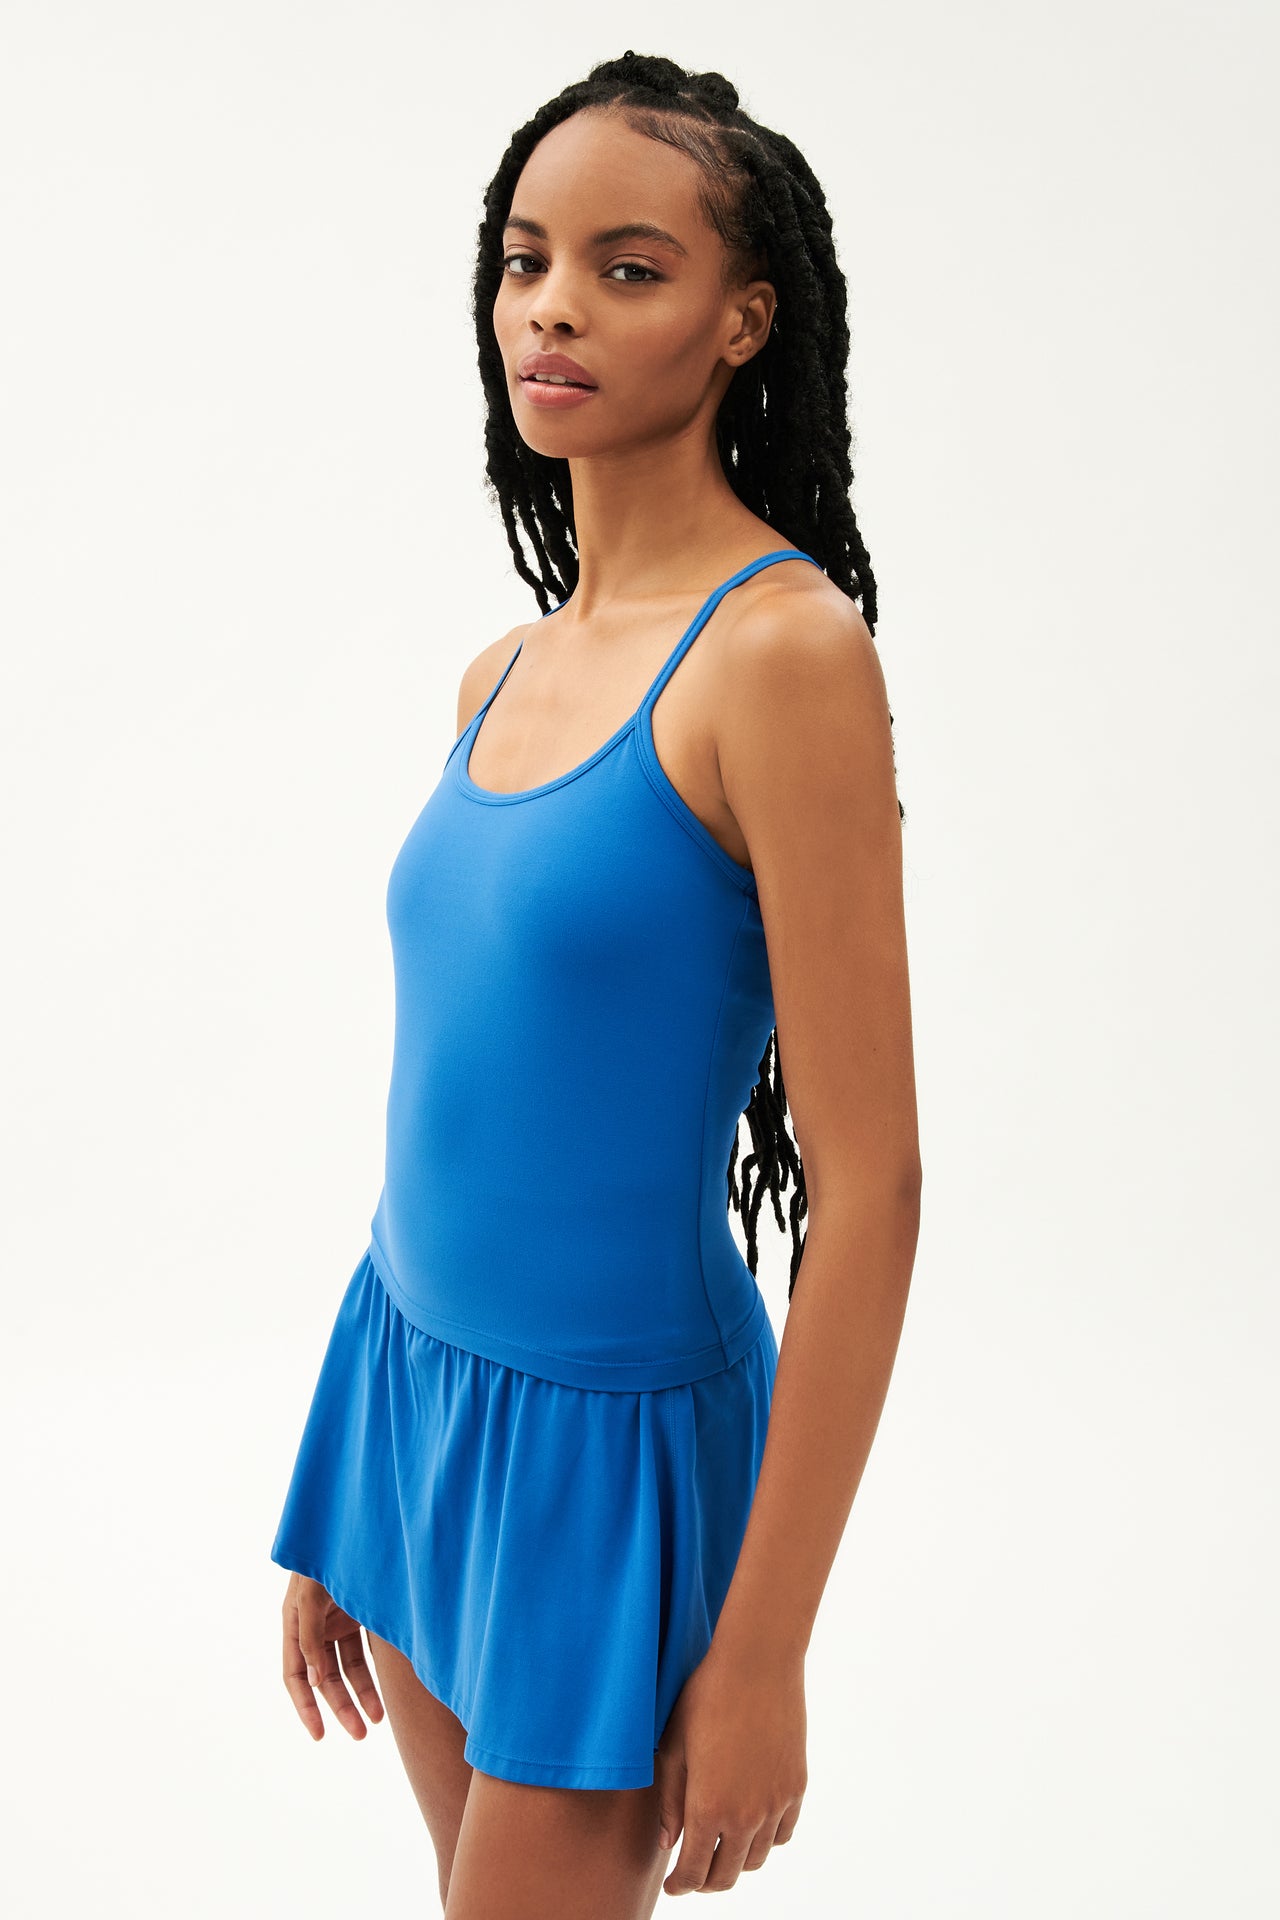 Side view of girl wearing blue spaghetti strap tank top with blue skirt